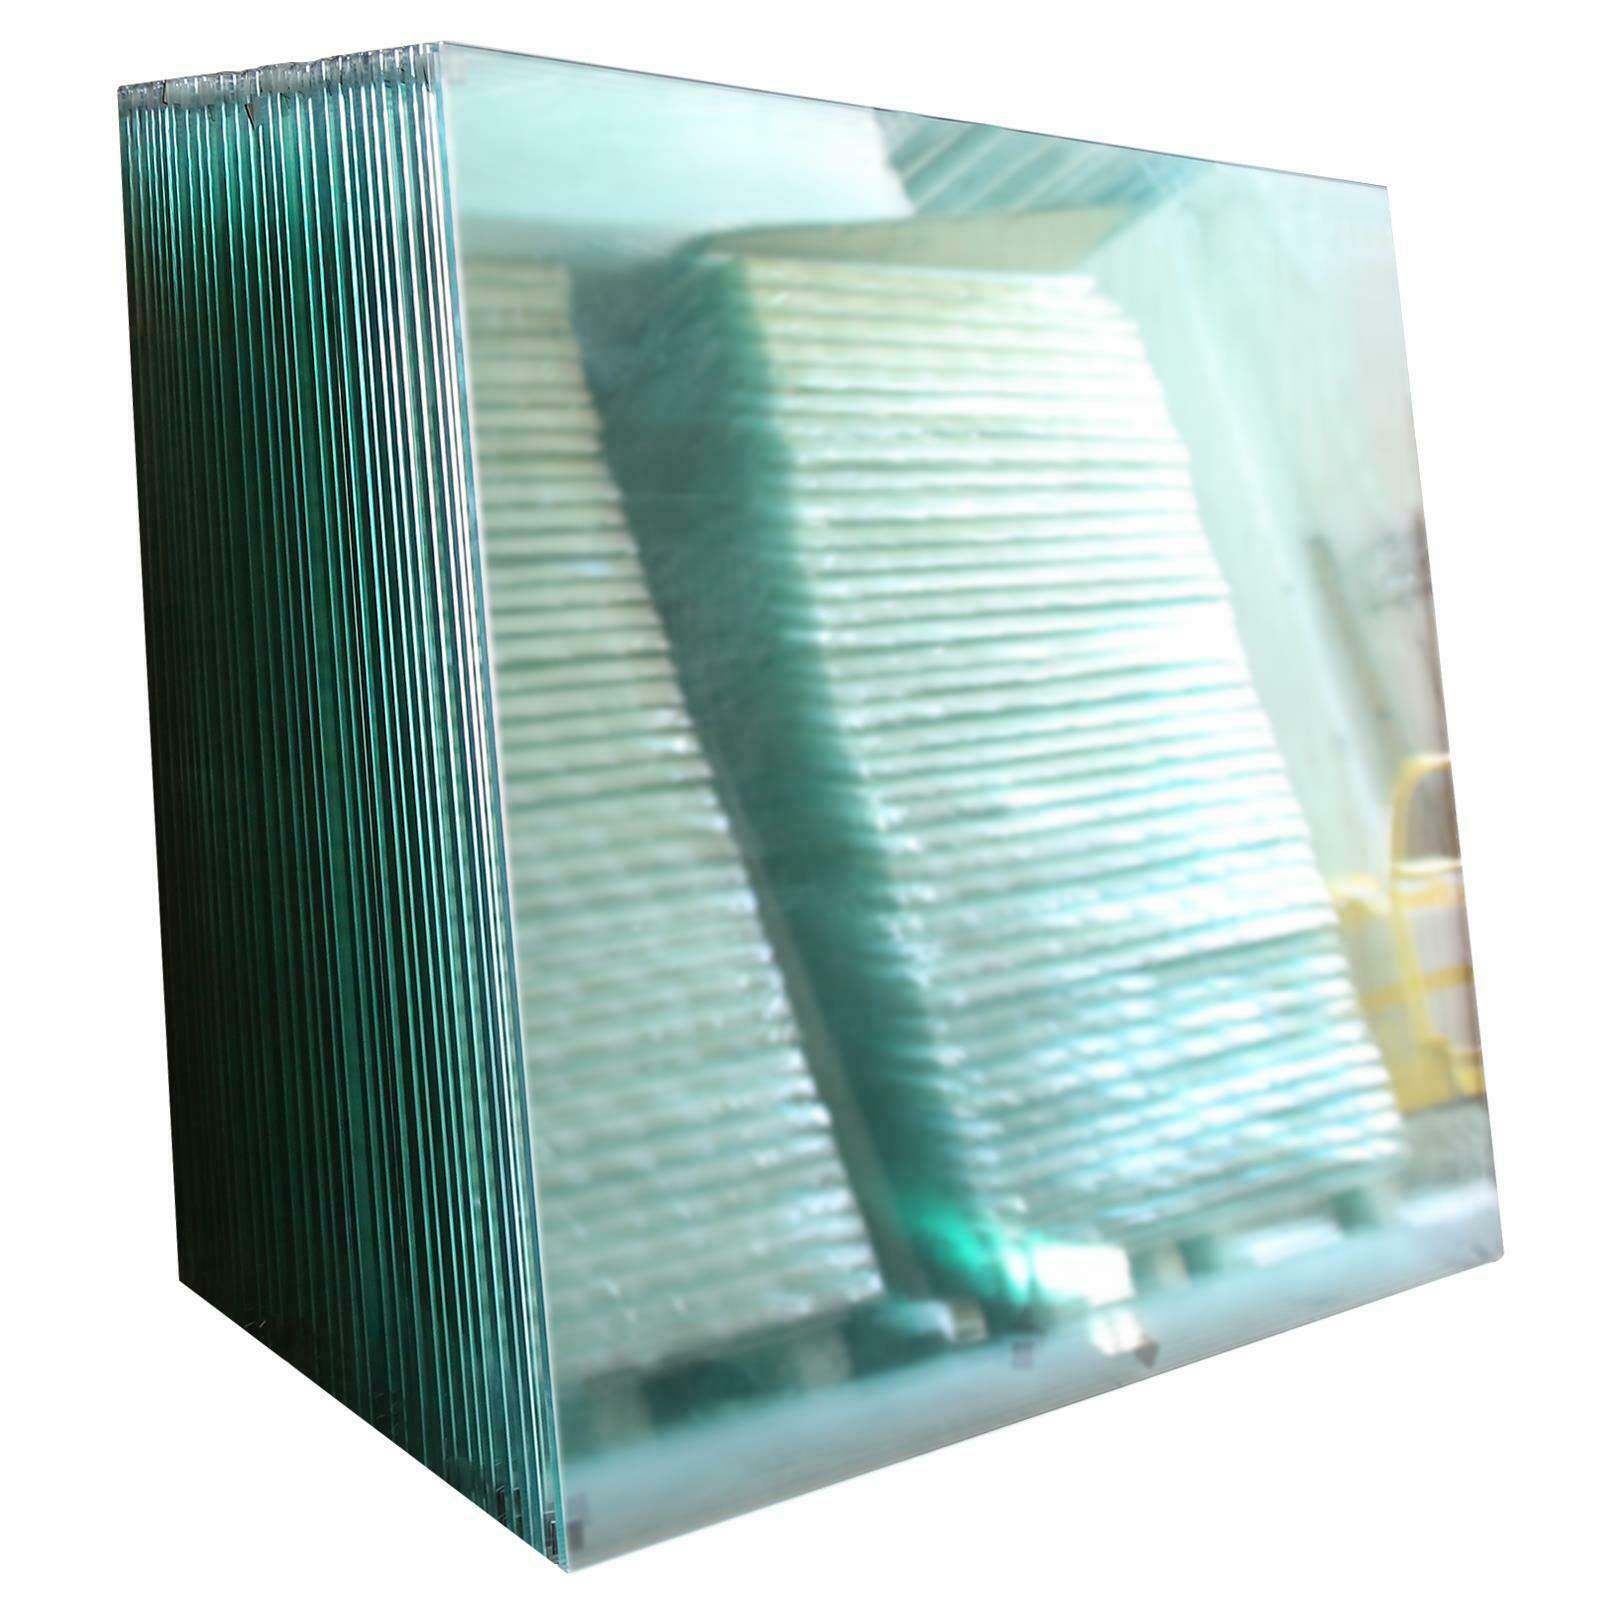 100cm x 120cm CE Certified 10mm Clear Toughened Safety Glass